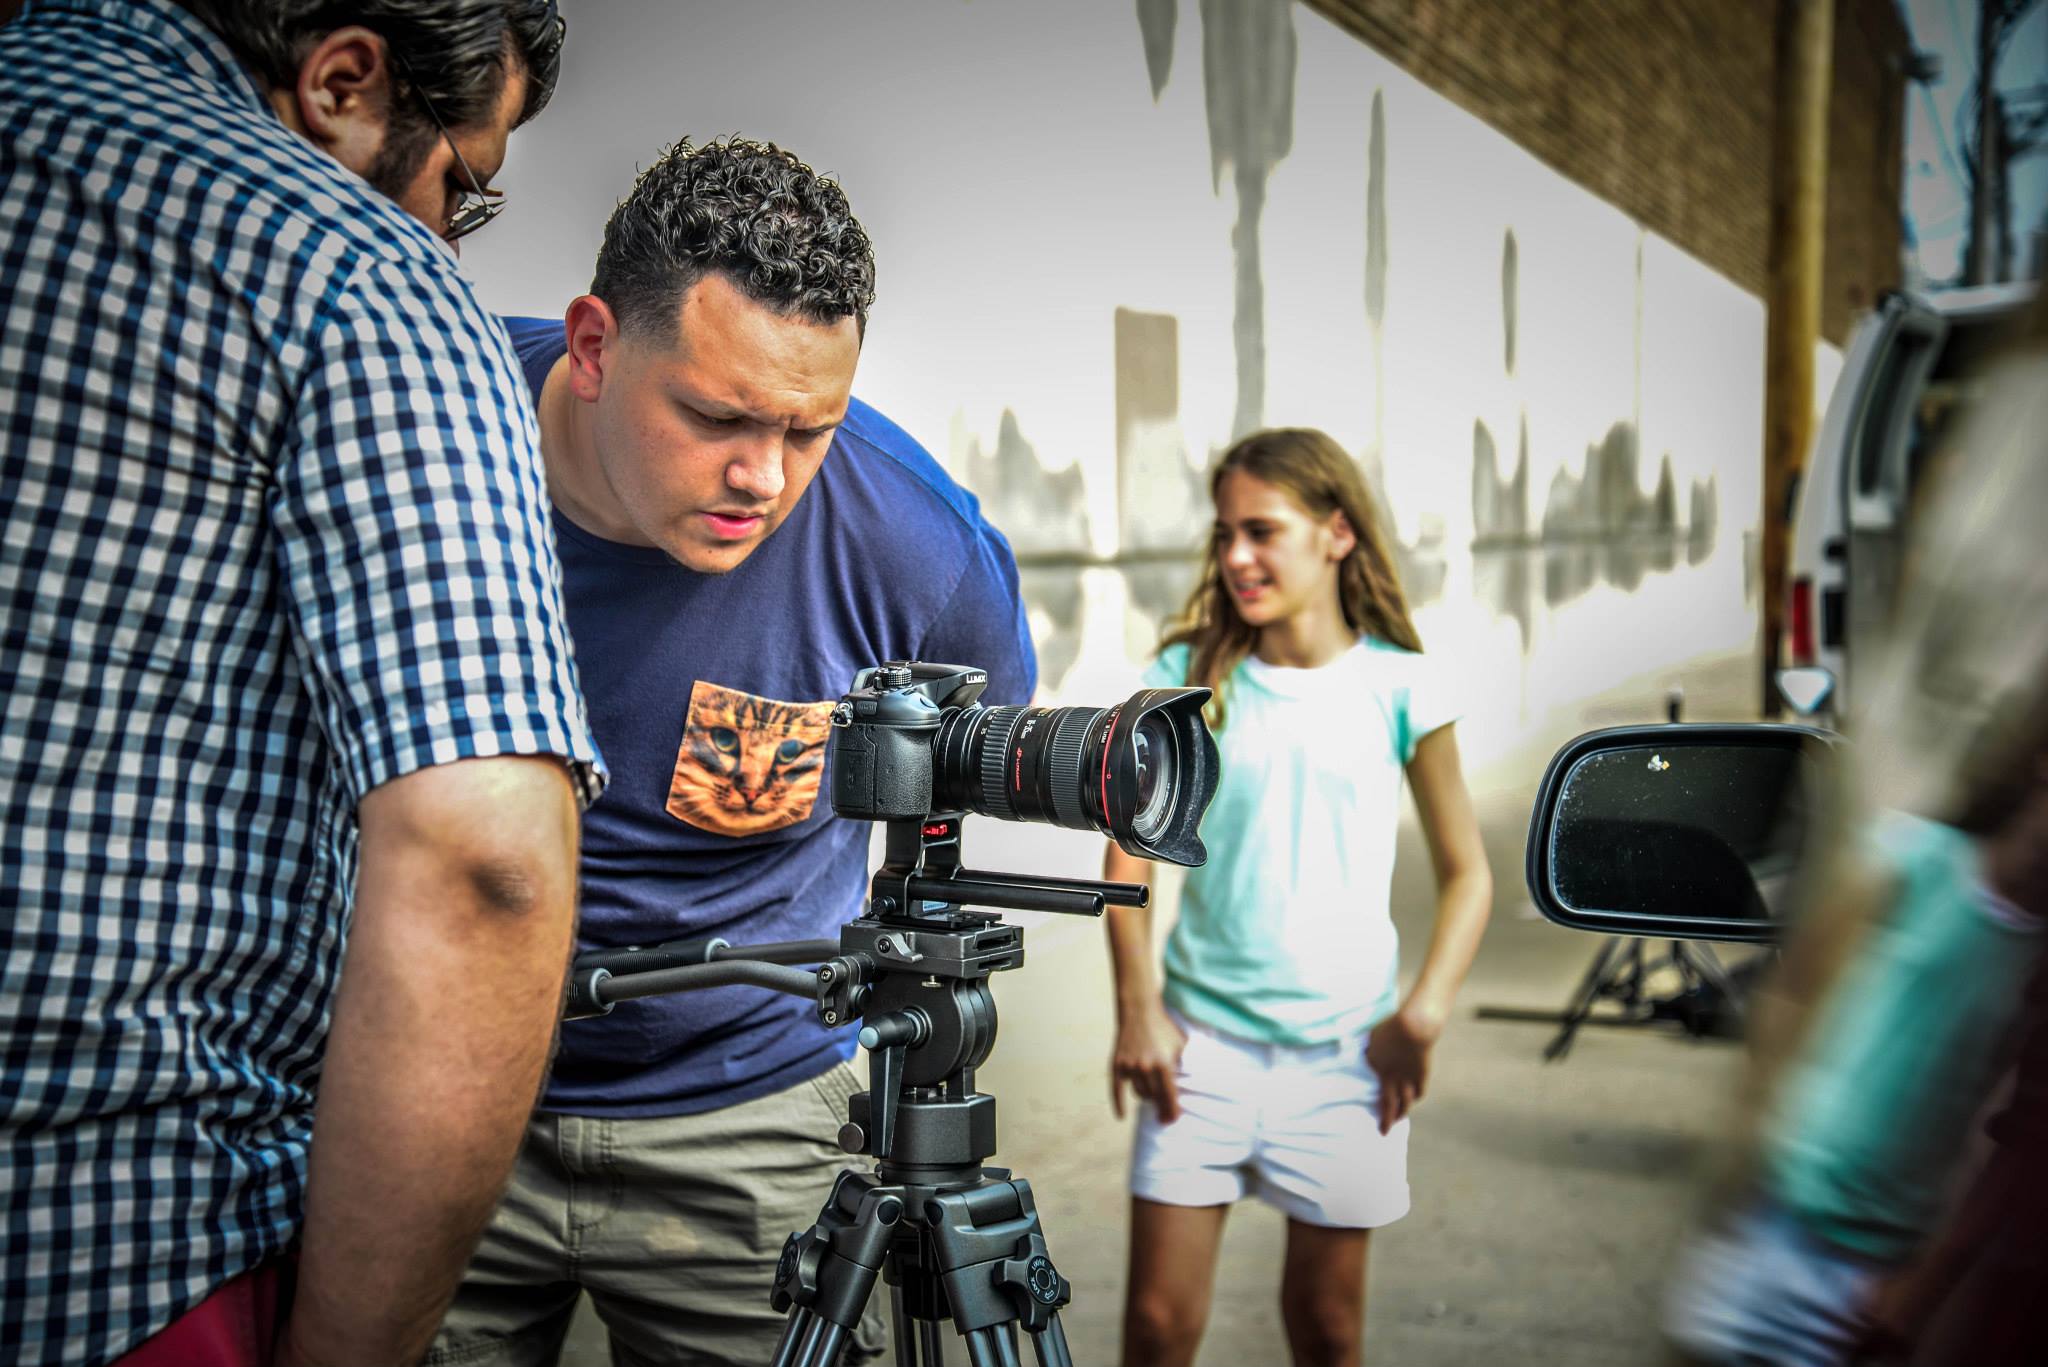 Film Director Raul Colon on set of the movie 